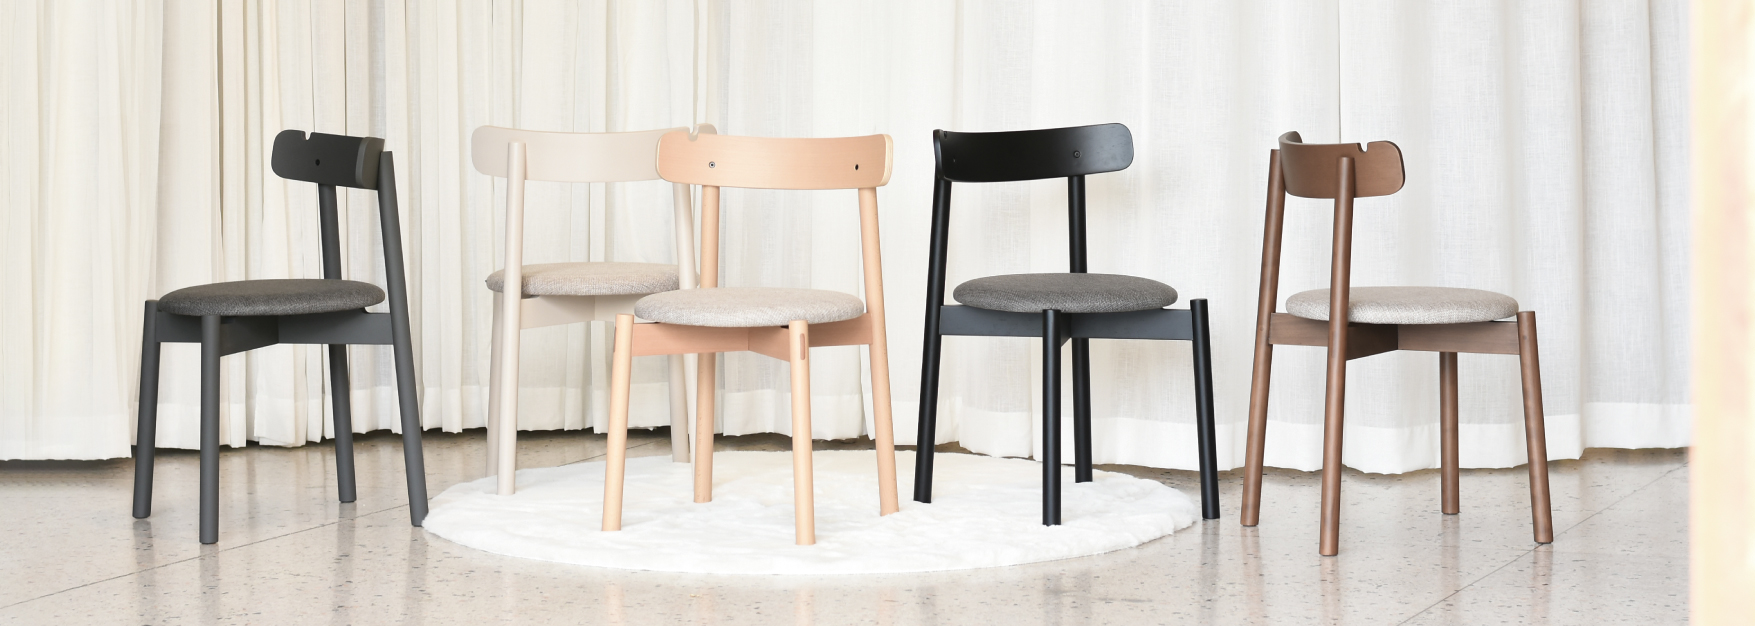 PLUS CHAIR: THE FIRST FLAT-PACK SOLID WOOD CHAIR BY PODIUM LITE